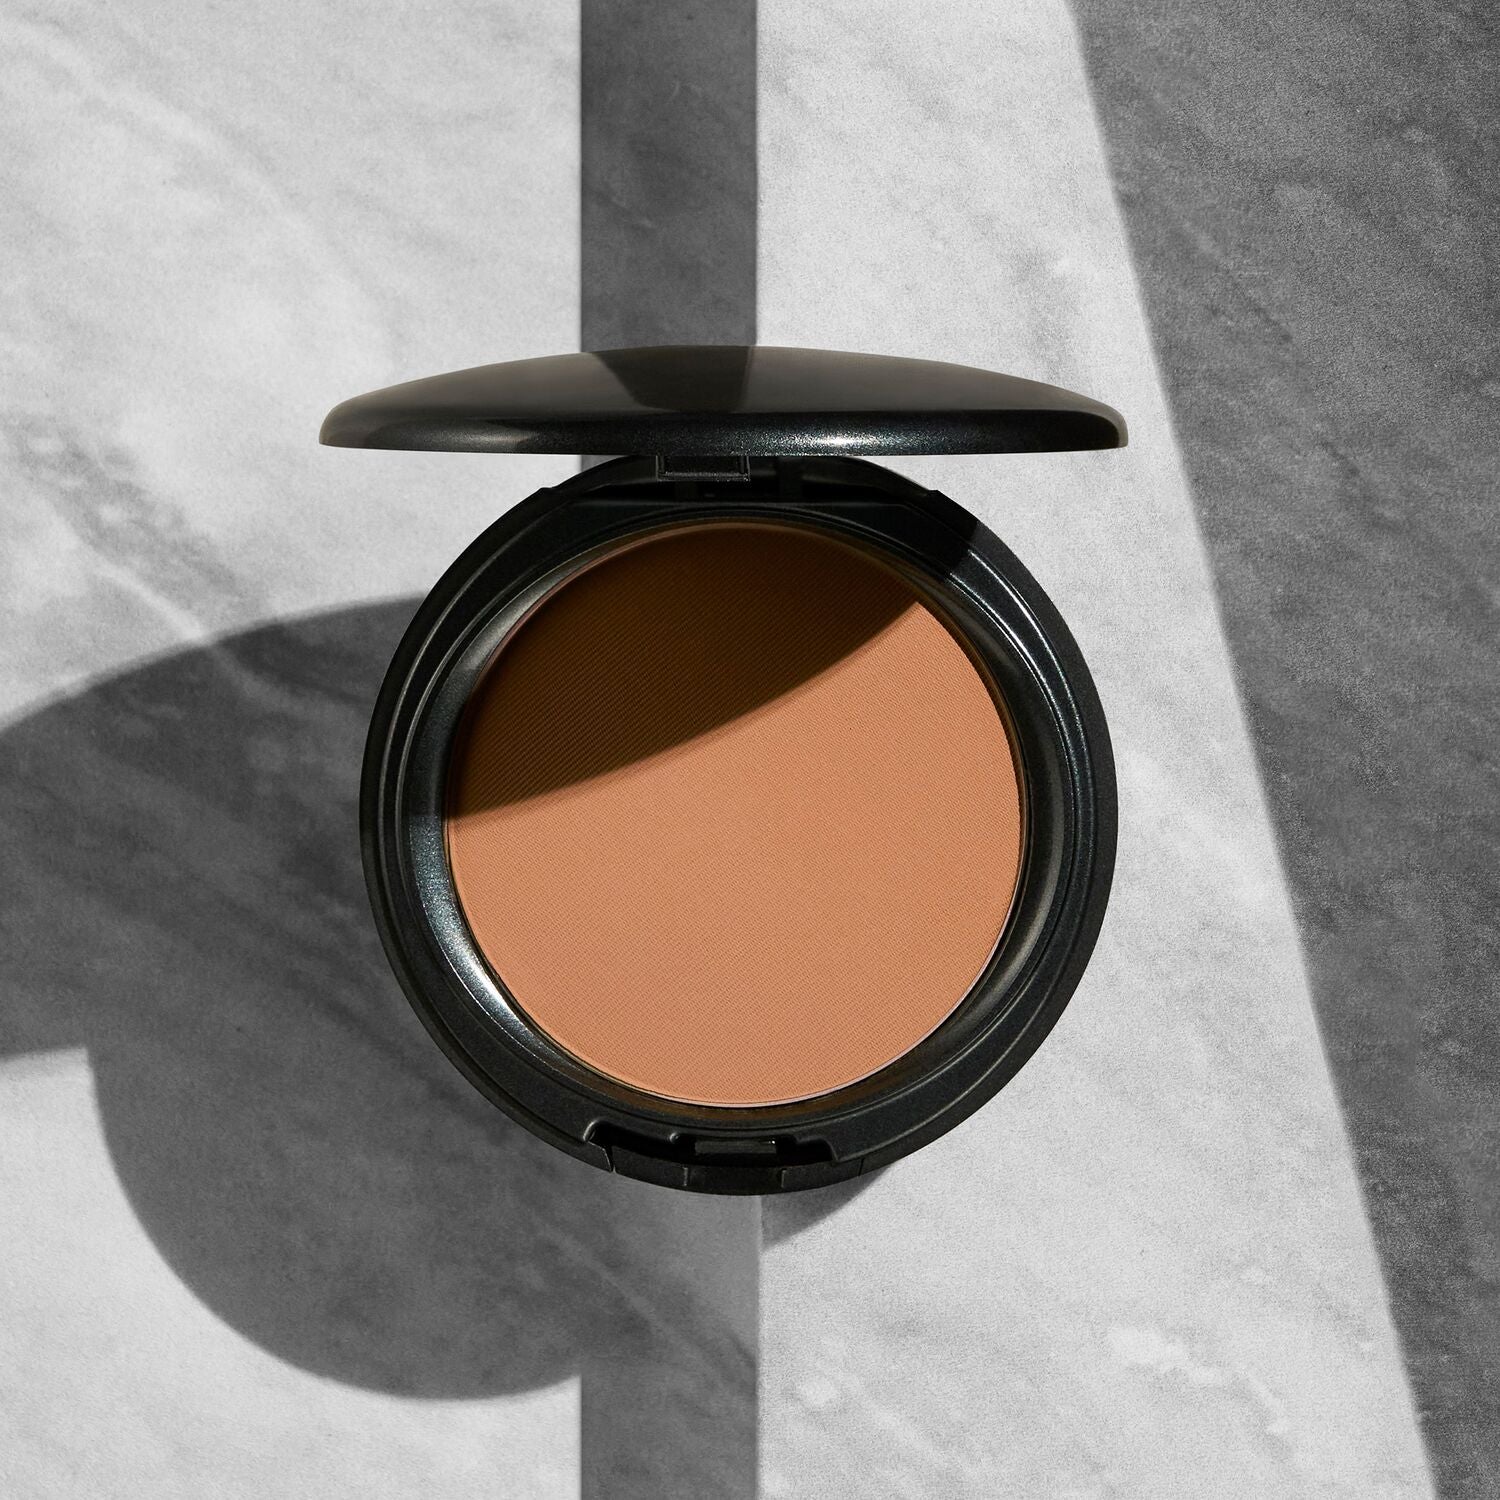 Coverfx Pressed Mineral Foundation in shade T1